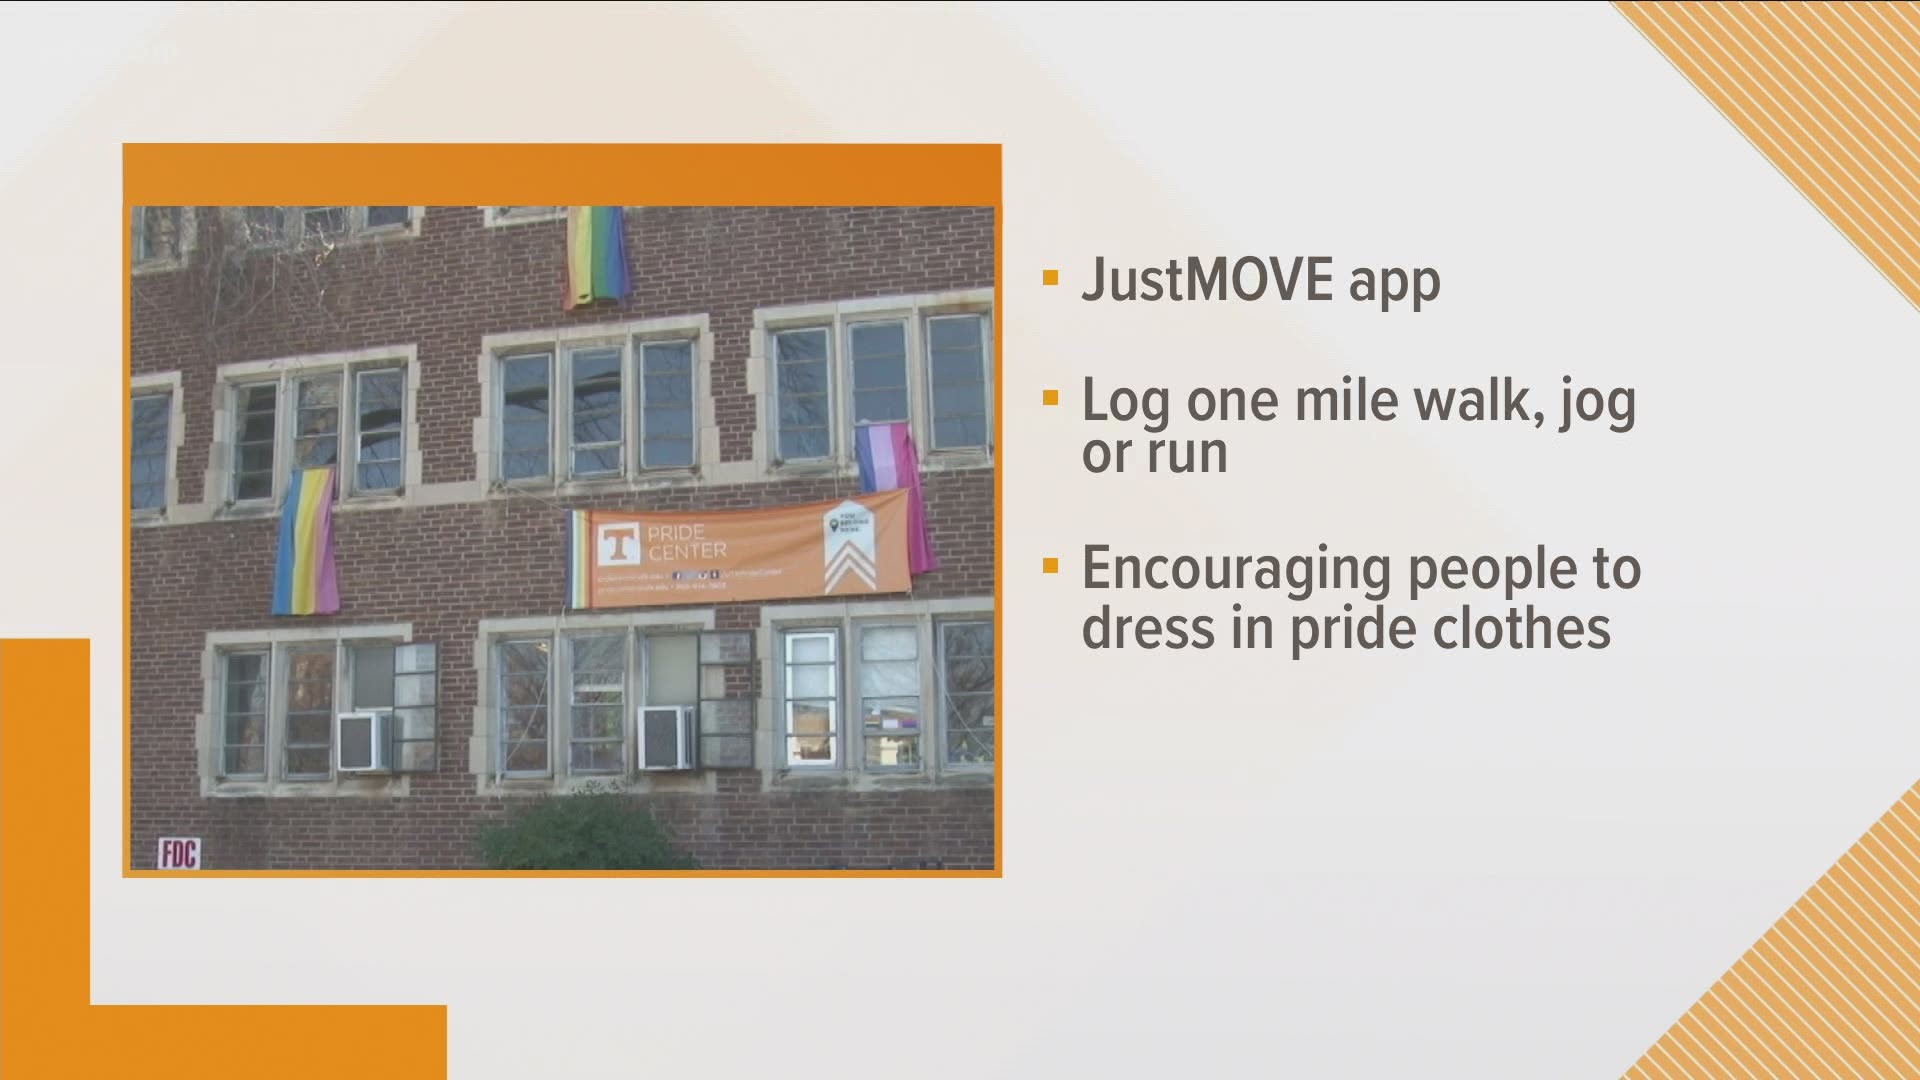 It's happening through the Just Move app where students can walk, jog or run a mile to complete the challenge.